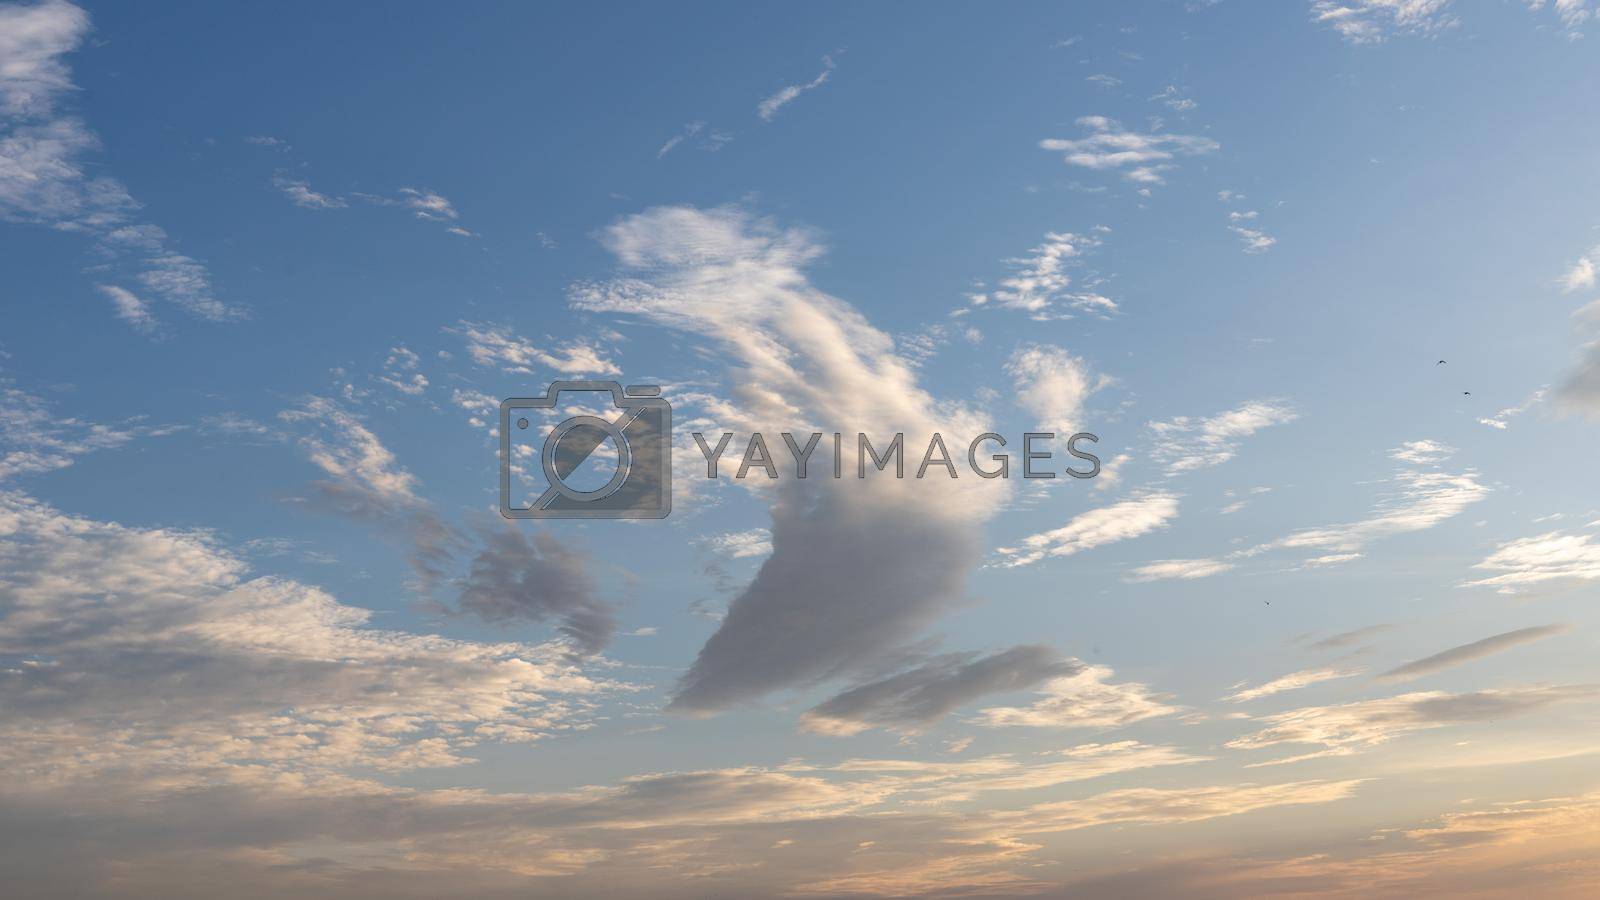 Royalty free image of Cloudscape or cloudy sky background by Bilalphotos